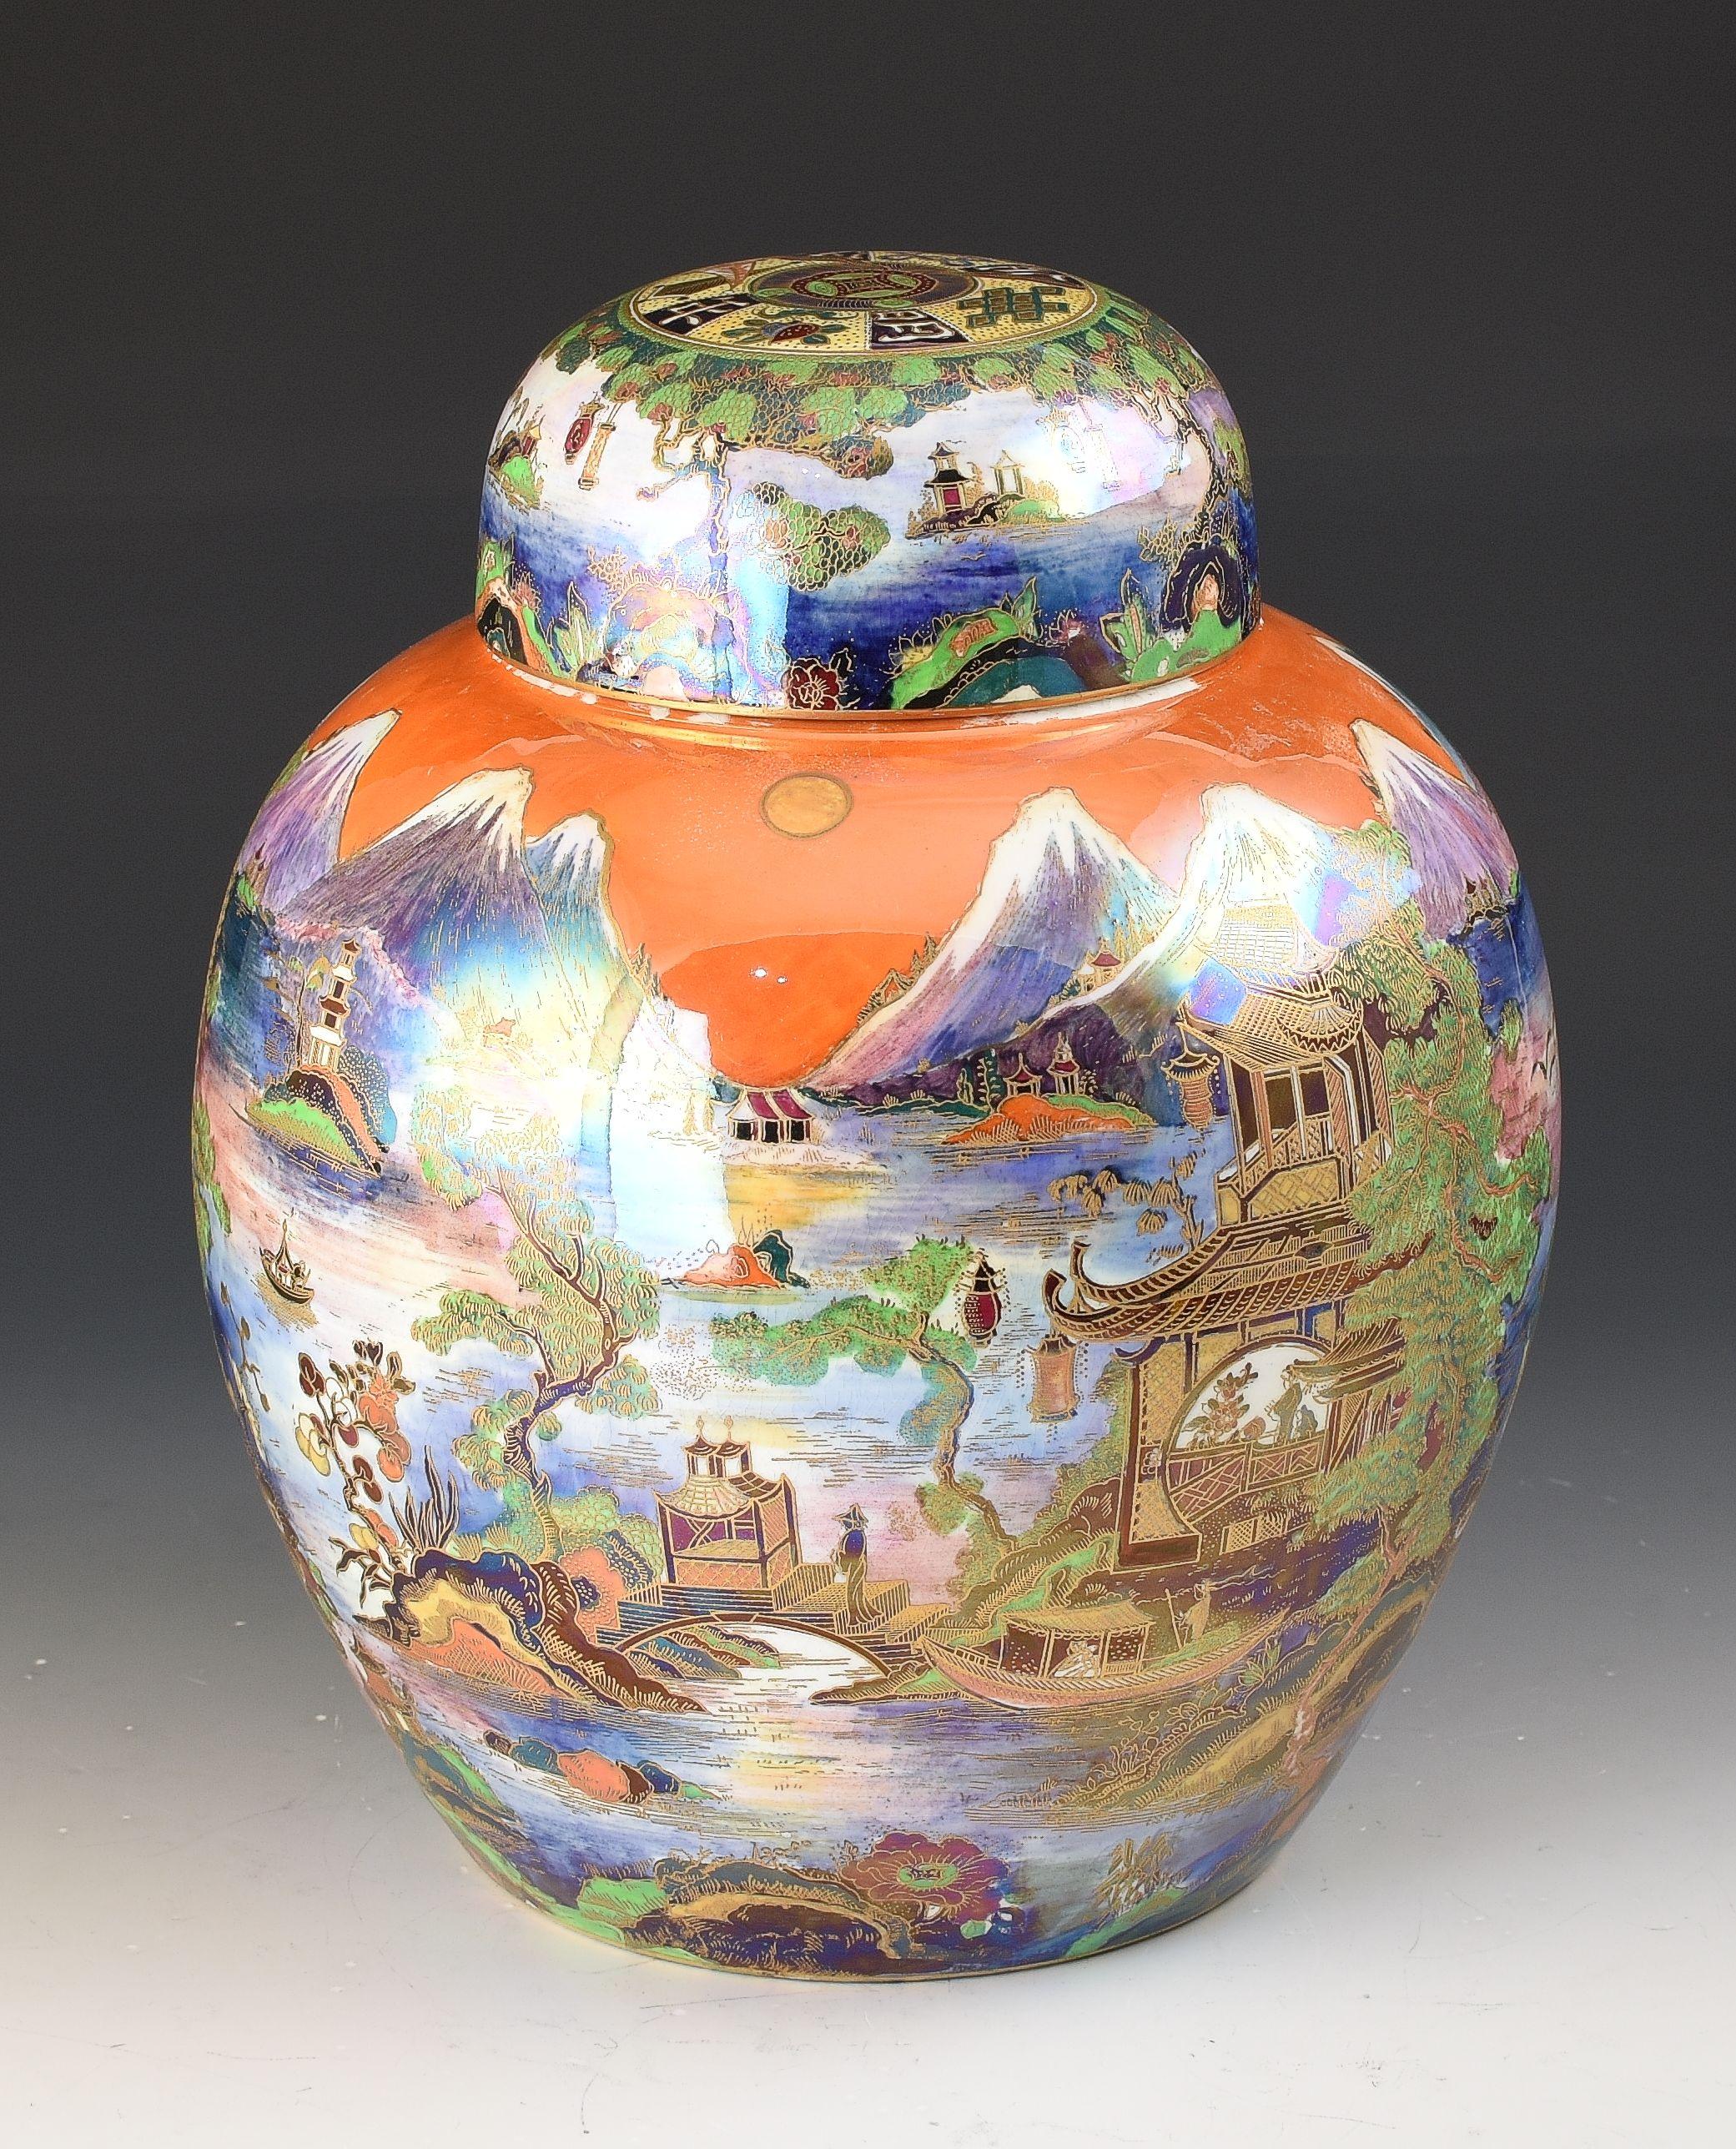 A rare Ginger jar in Chinland that will date to around 1930. Beautifully decorated with full repeating pattern around the body. There are some white rub marks on the lustre where the lid sits otherwise i can GUARANTEE no damage and no restoration.